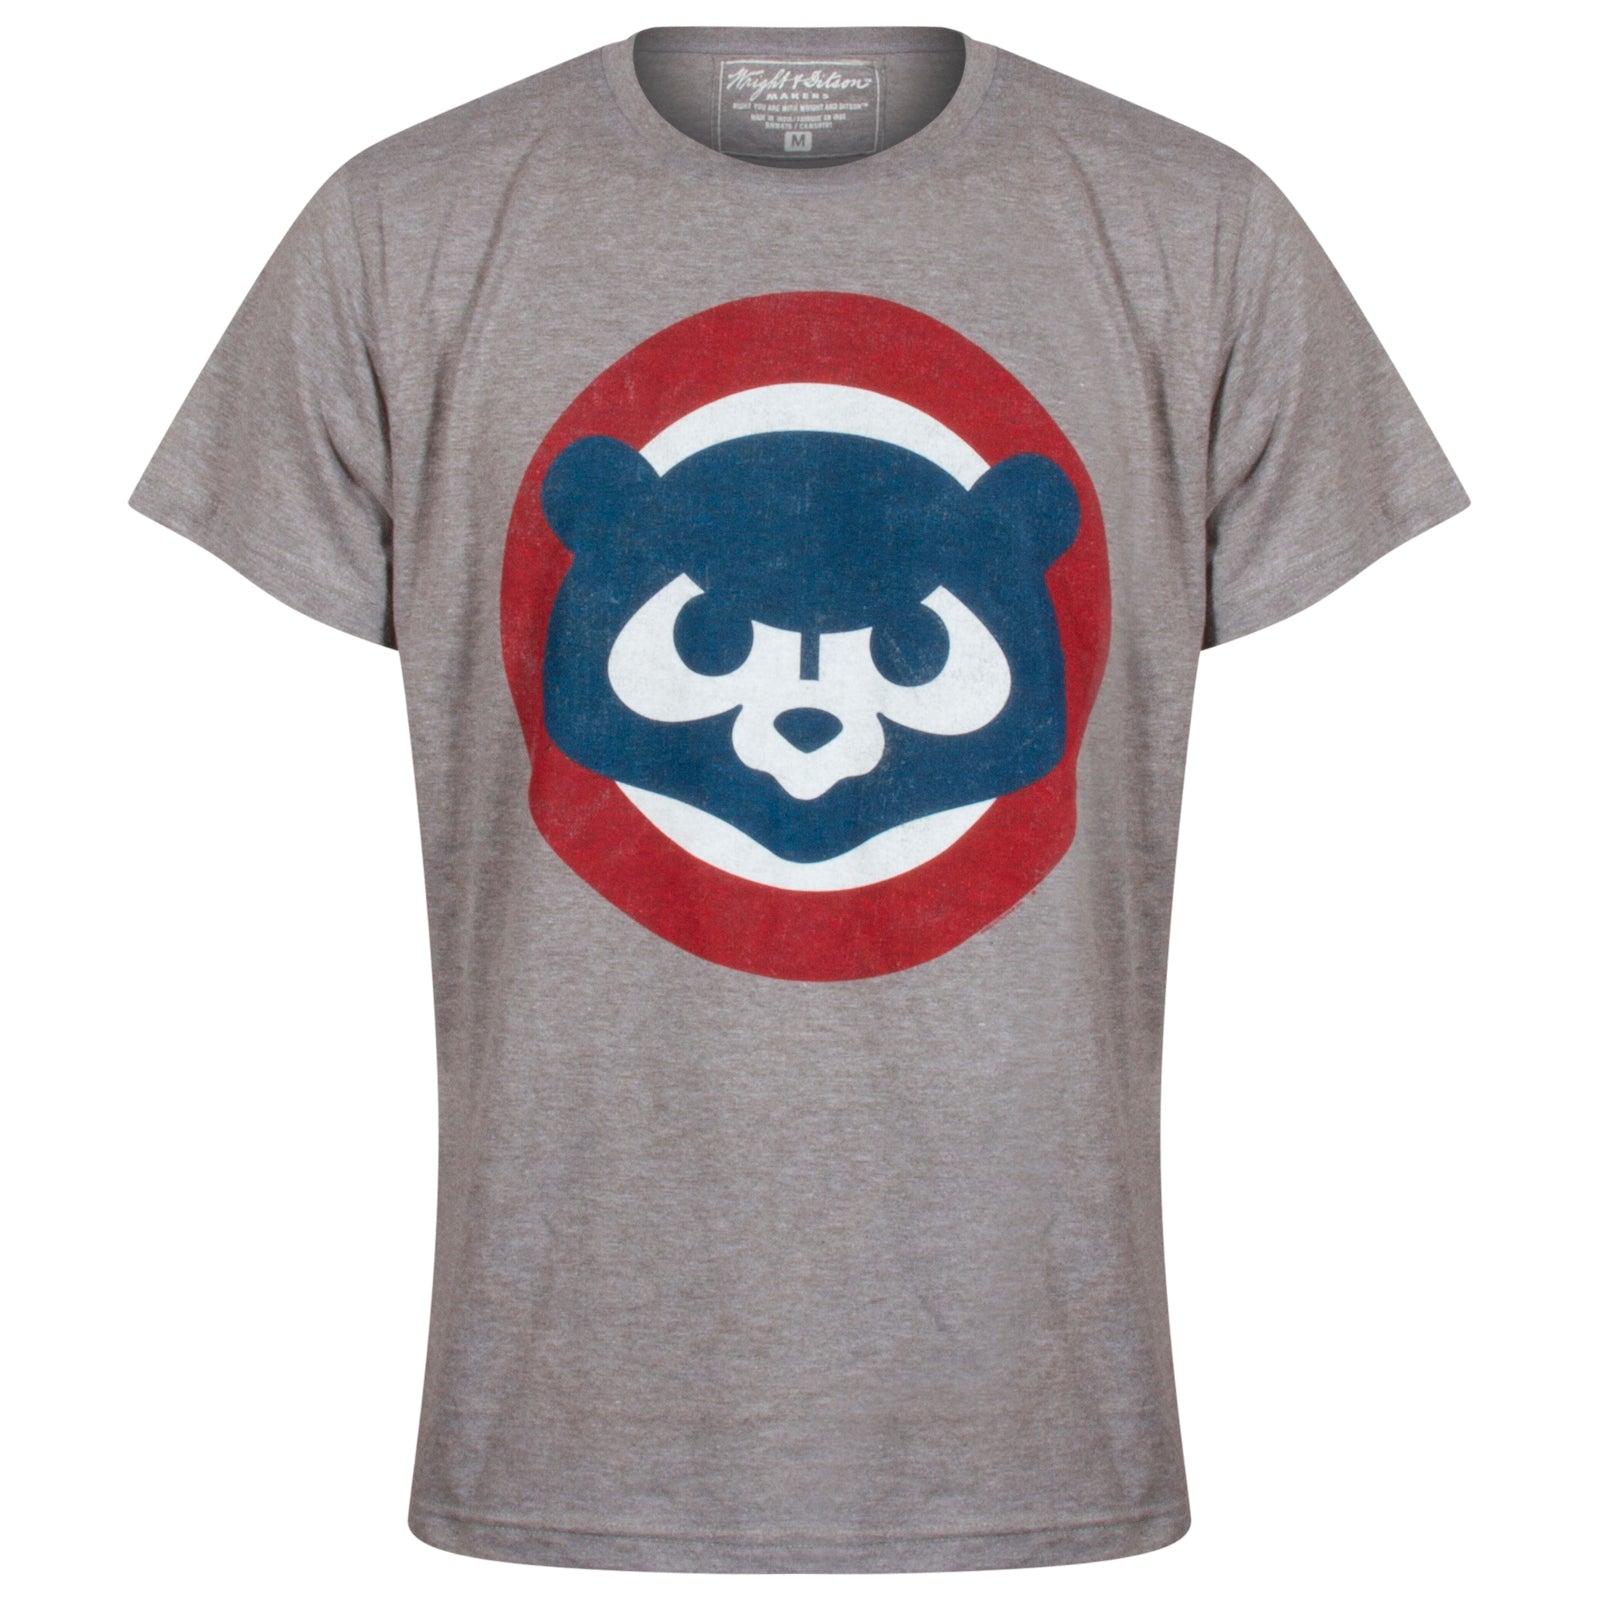 Wright & Ditson Chicago Cubs T-Shirt - Men's T-Shirts in Grey